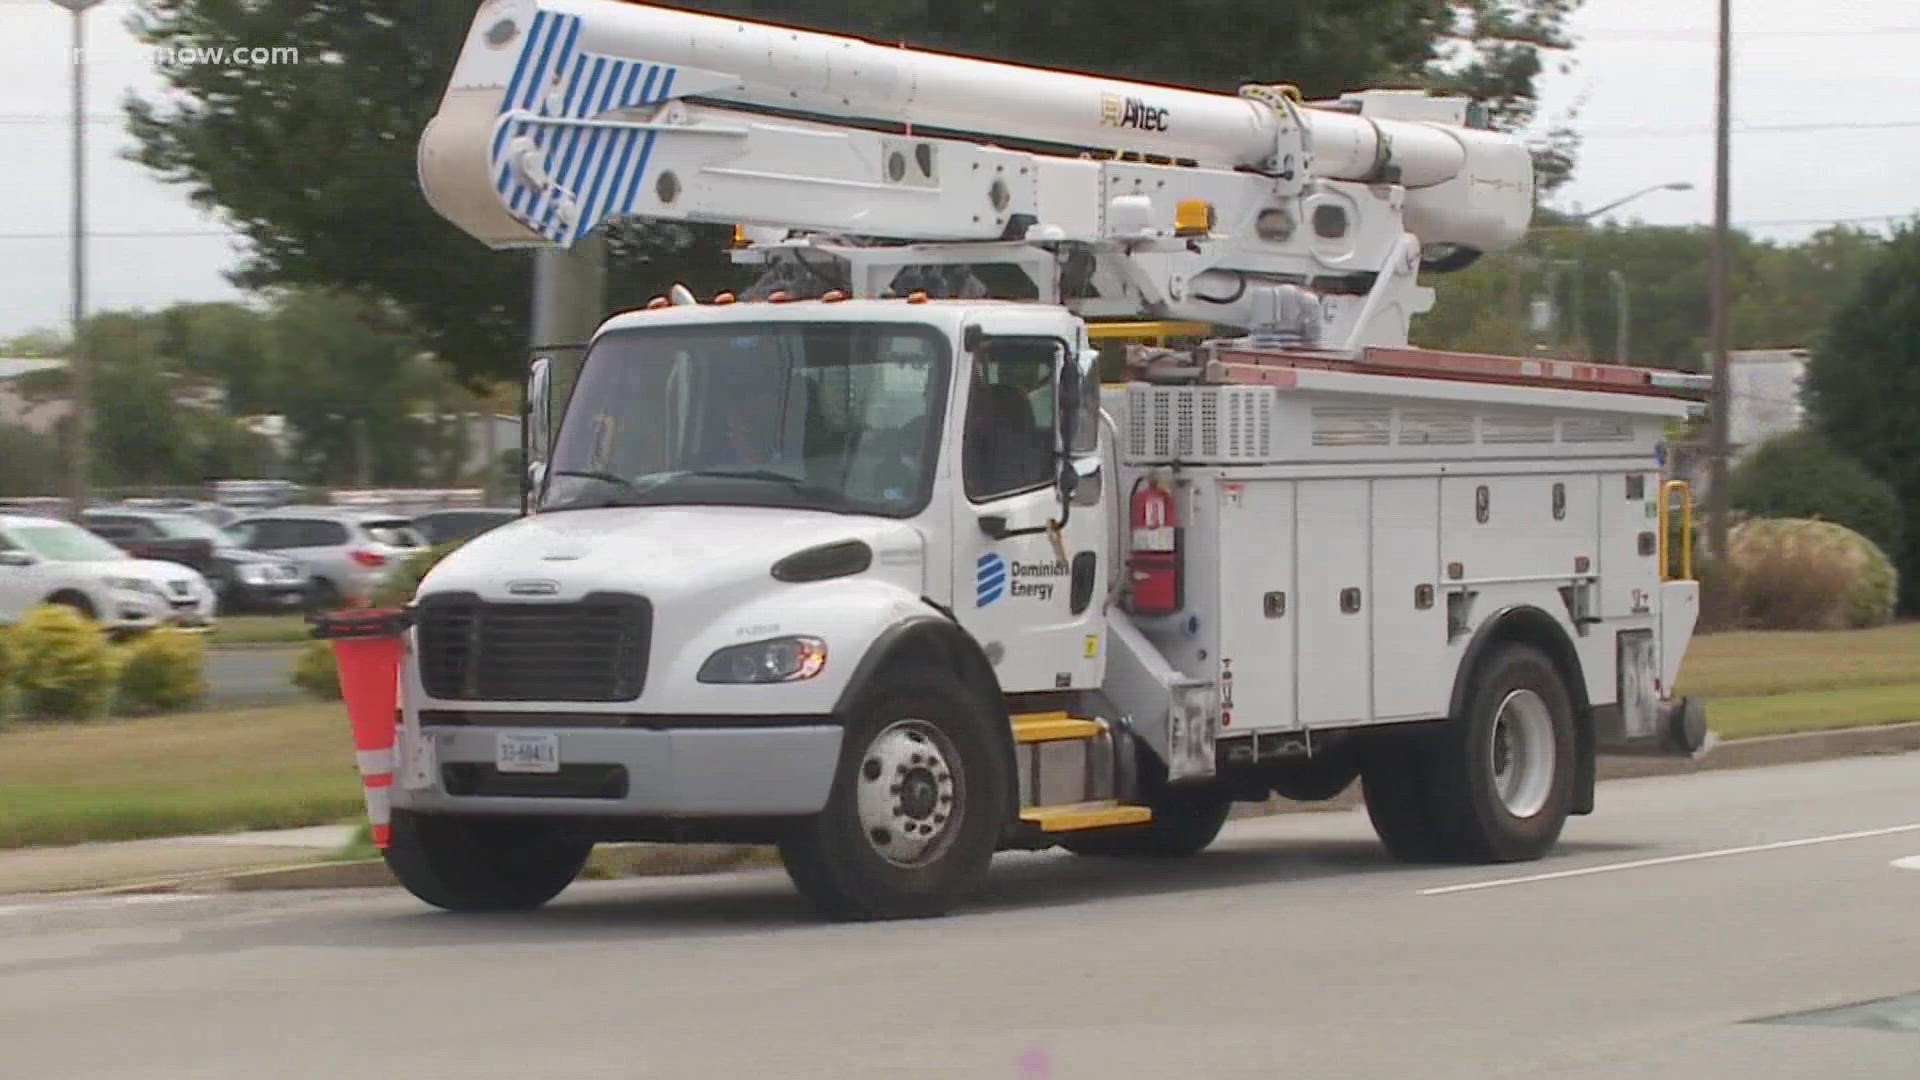 Dominion Energy says it's preparing to keep your lights on ahead of the stormy weekend.